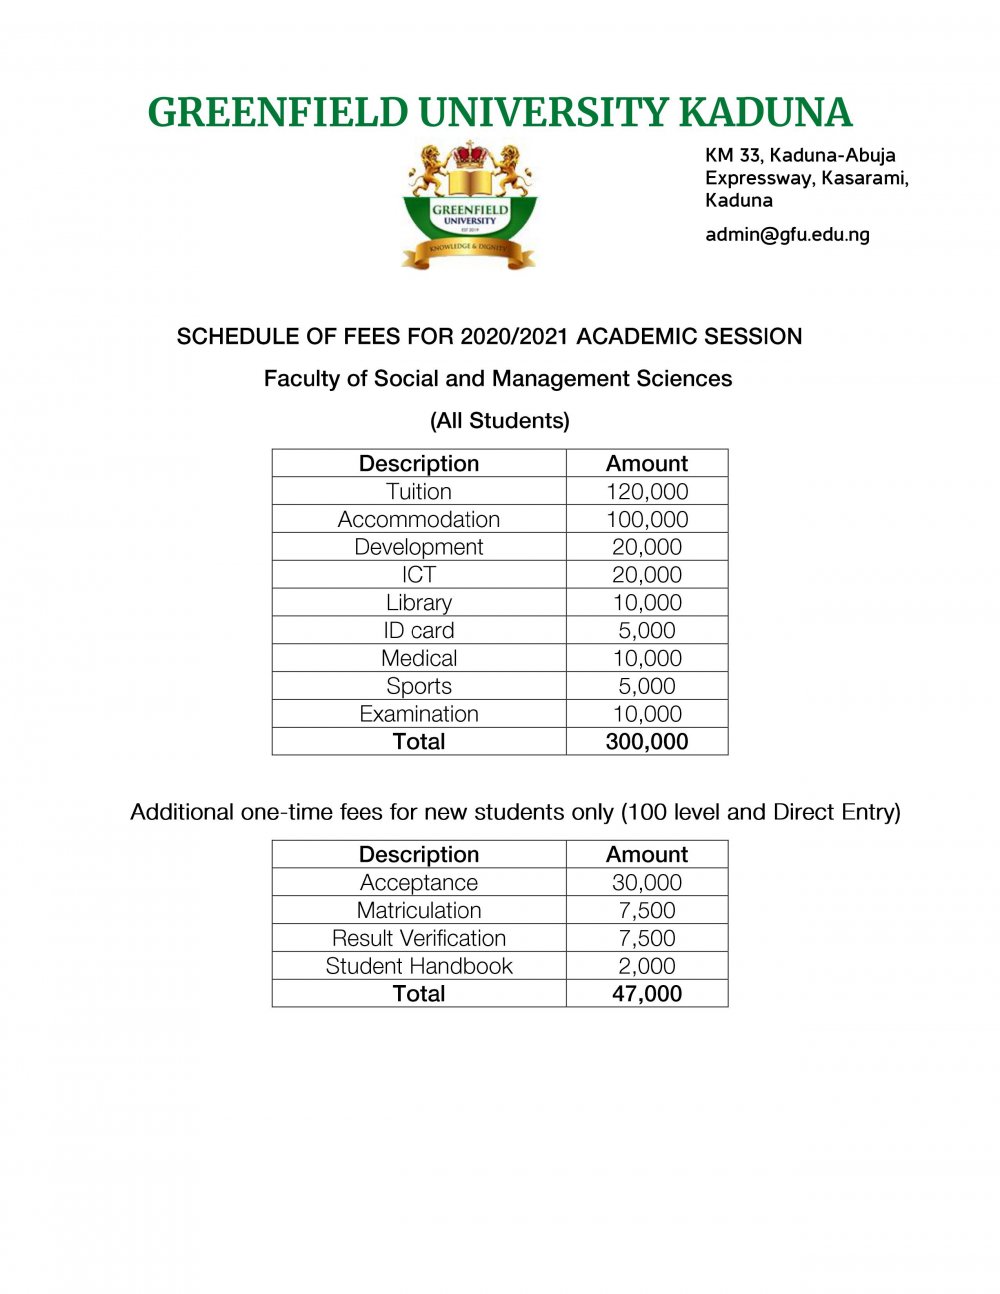 Greenfield University fees for 2020/2021 Academic Session